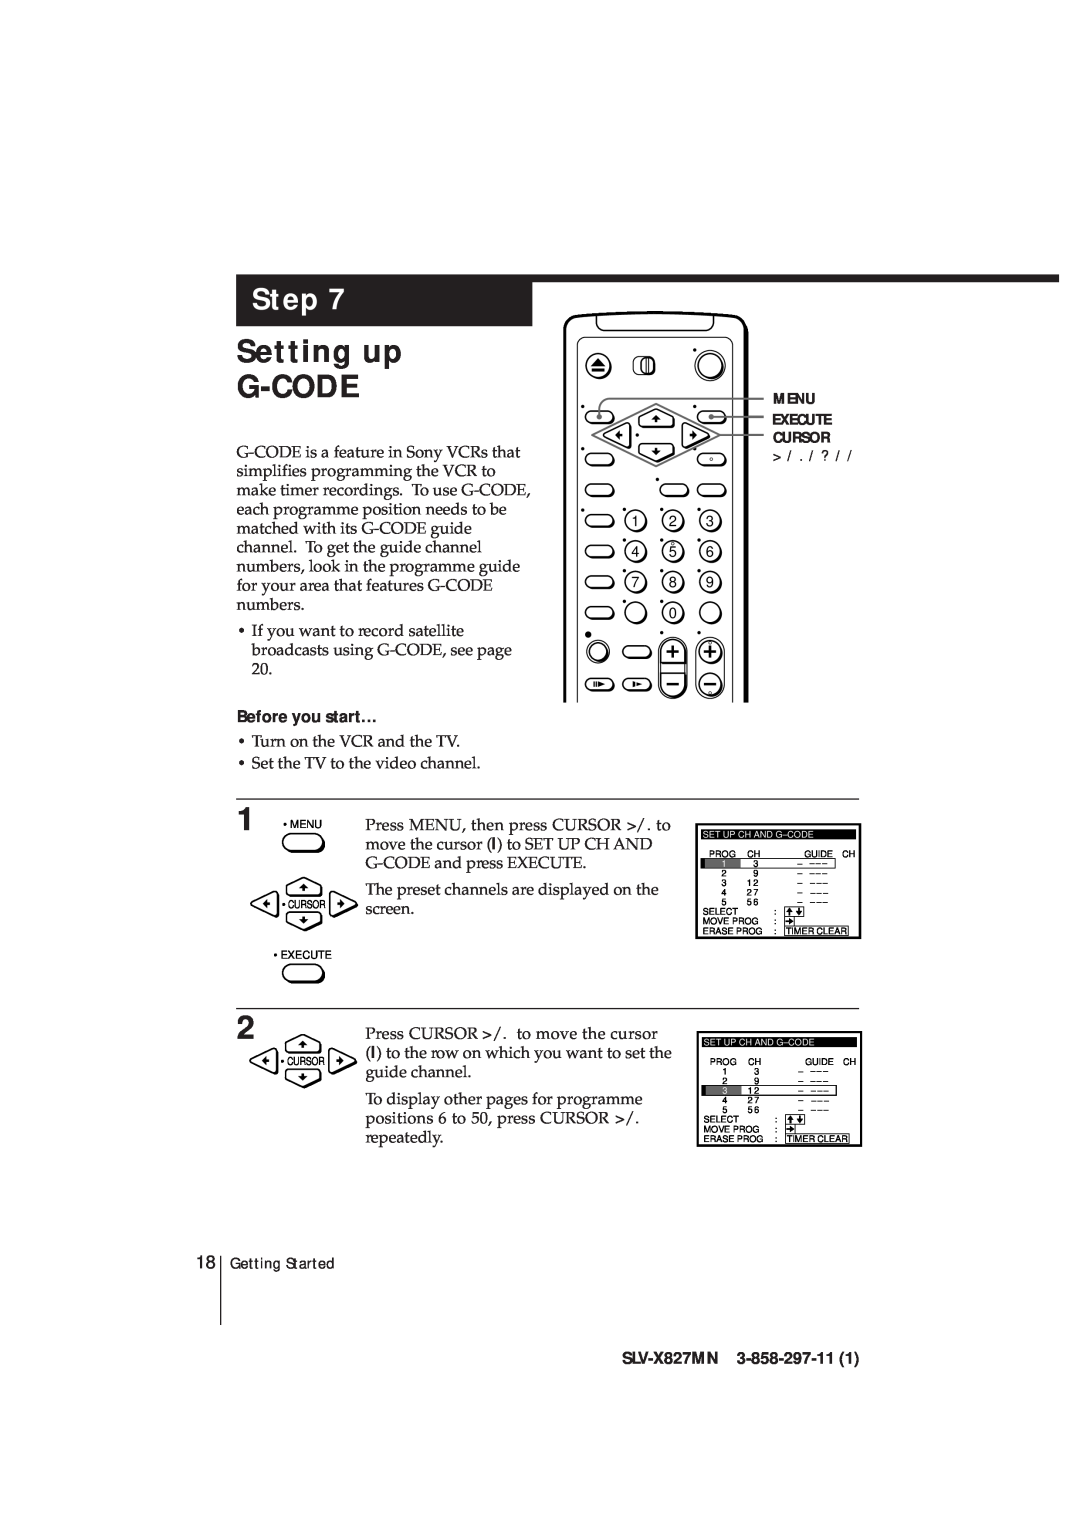 Sony manual Setting up G-CODE, Step, Before you start…, SLV-X827MN 3-858-297-11 